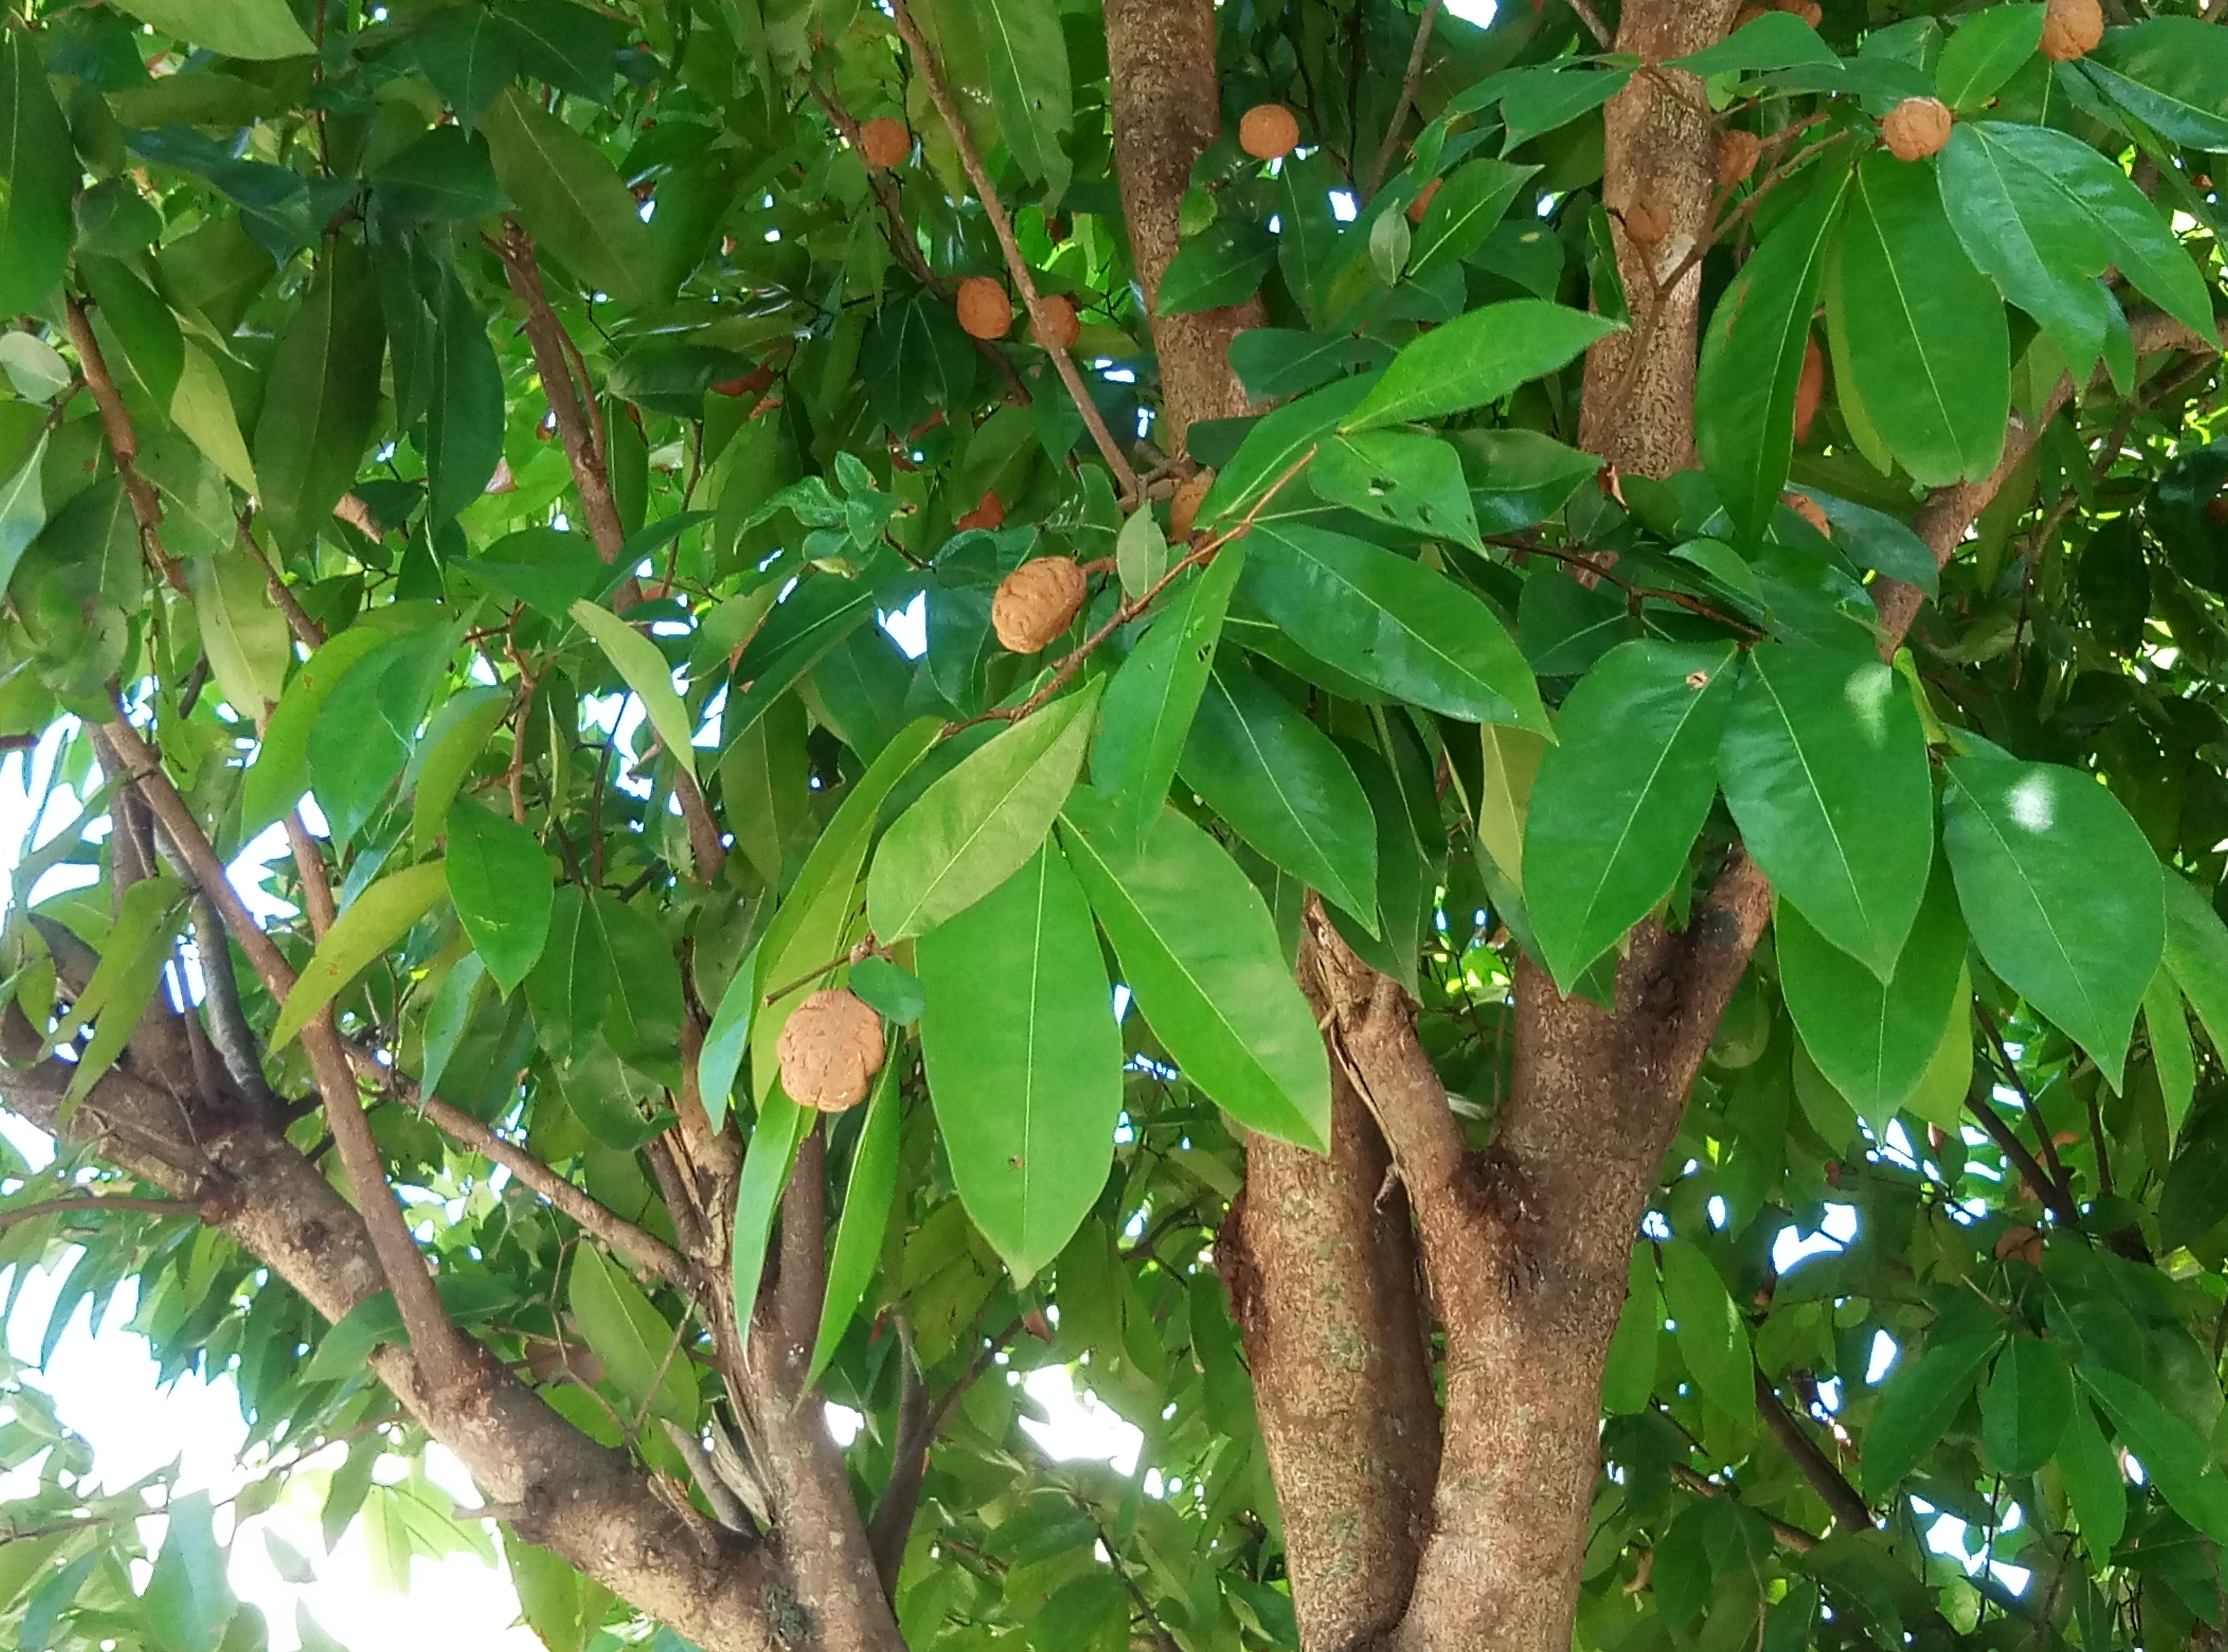 Please identify the family or genus/species of the tree?